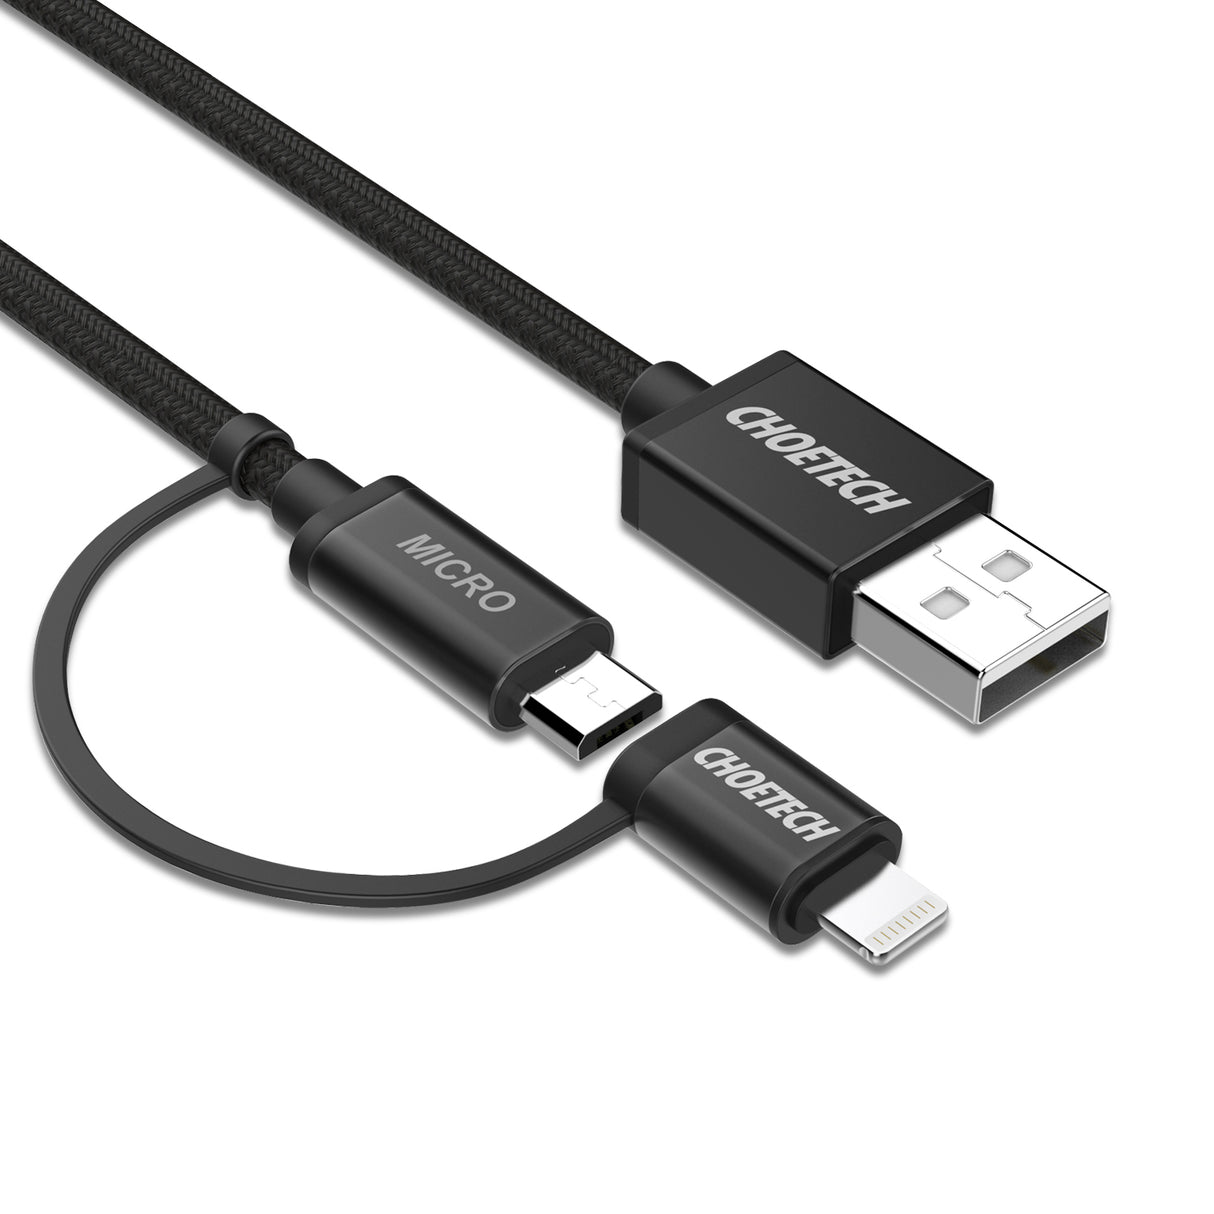 IP0028 Choetech 2-in-1 MFi Certified Lightning and Micro USB Cable